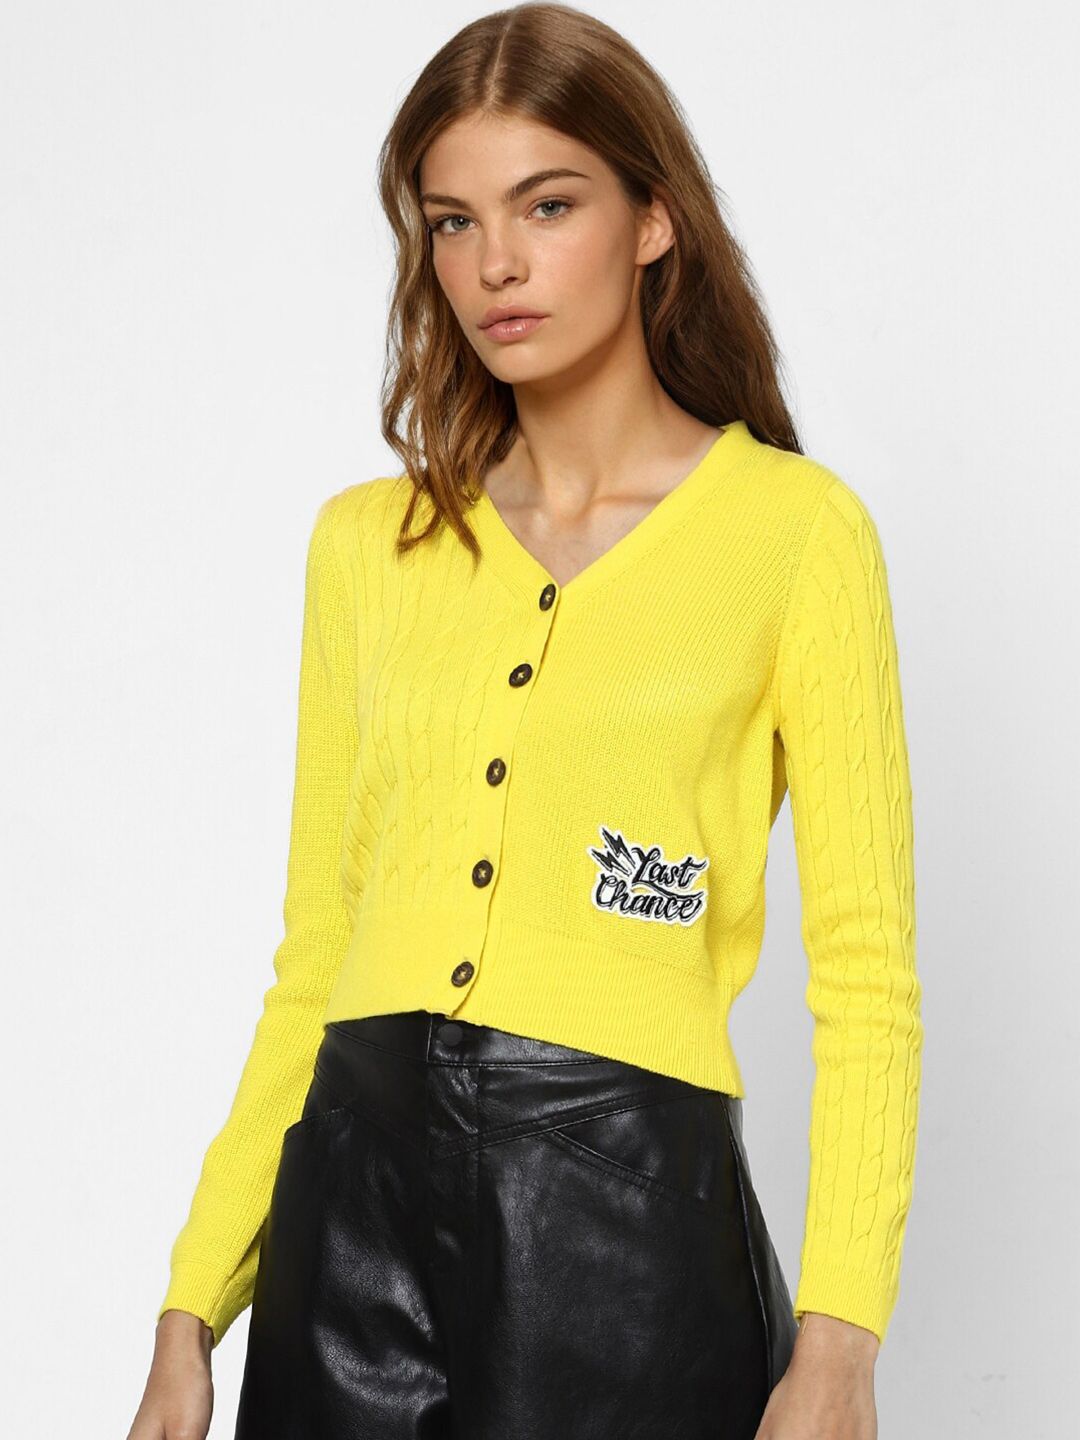 ONLY Women Yellow Cable Knit Cotton Cardigan Price in India